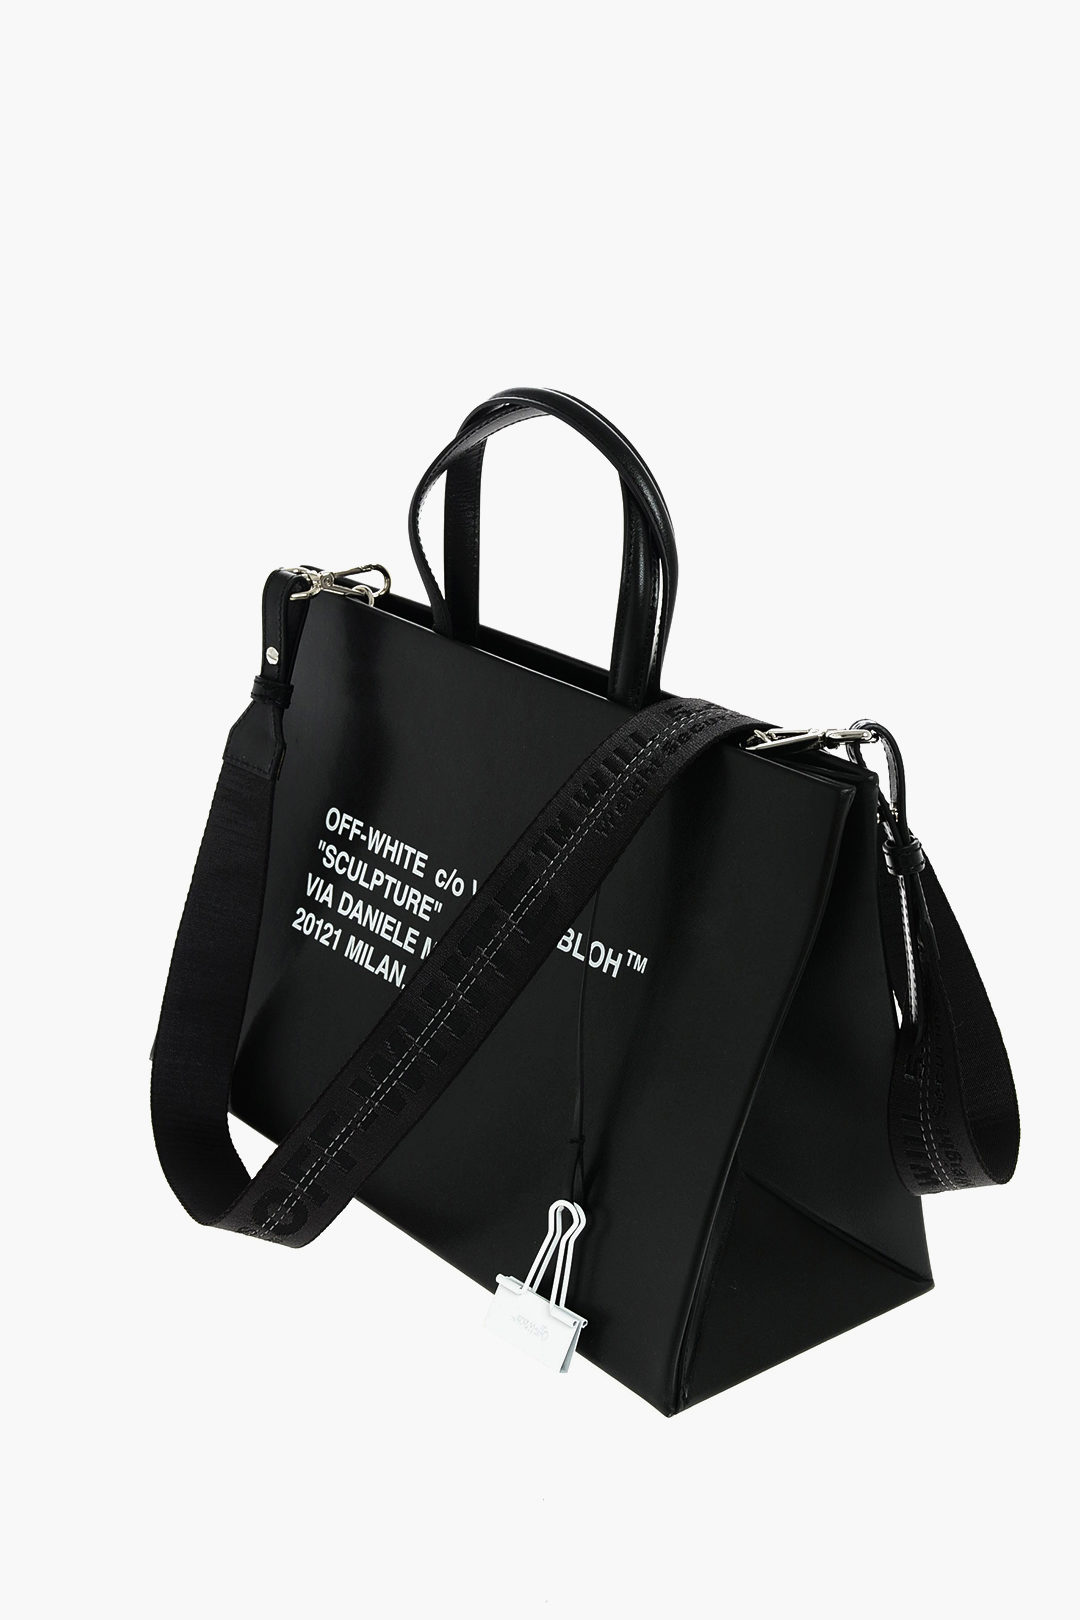 Off-White Leather BABY BOX Bag women - Glamood Outlet